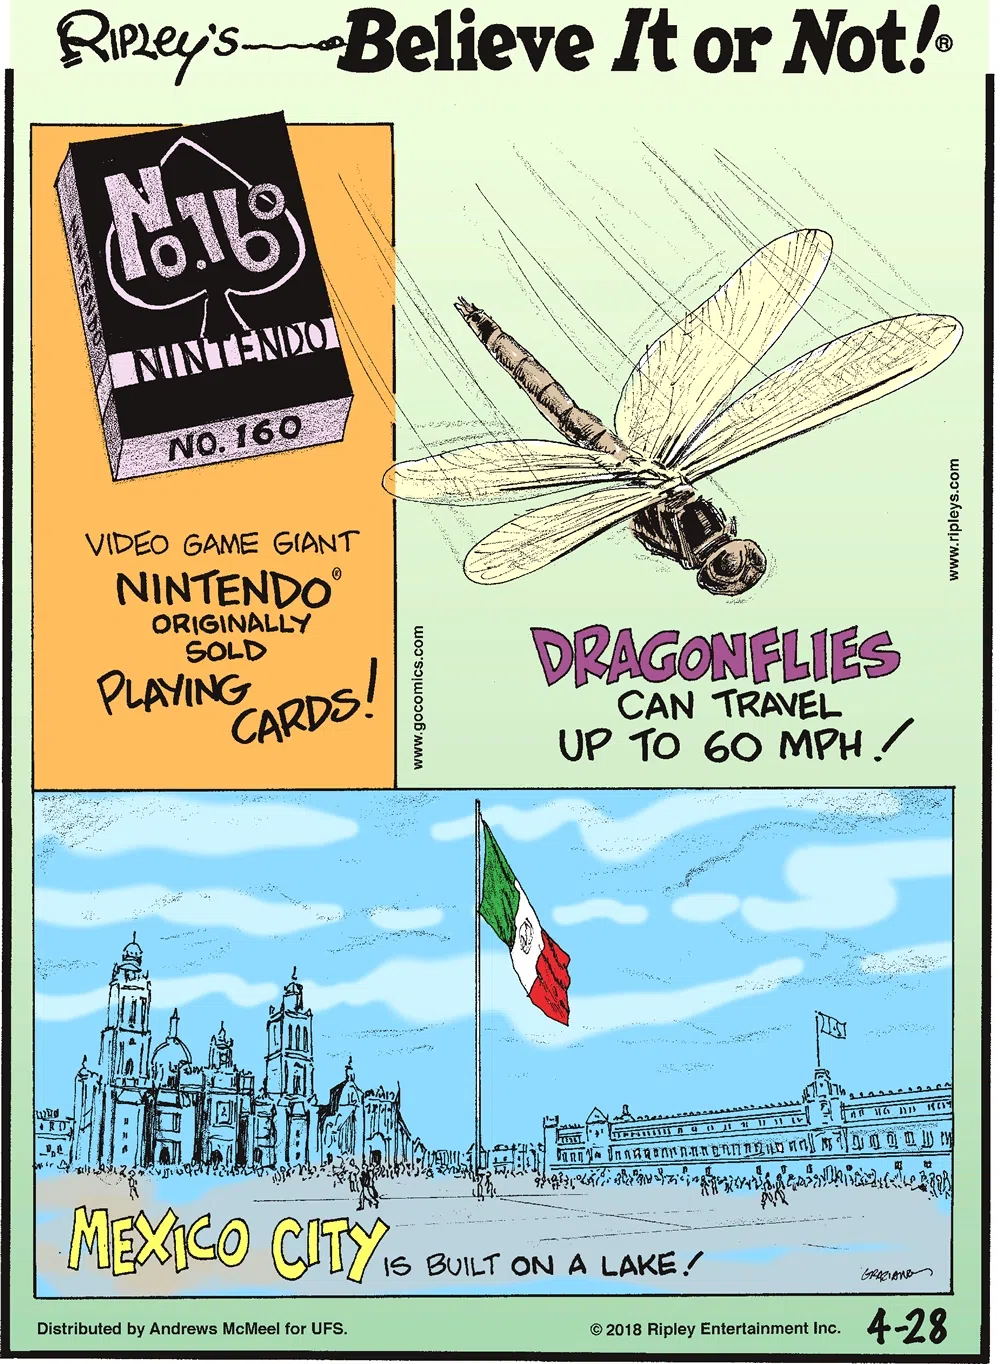 Video game giant Nintendo originally sold playing cards!-------------------- Dragonflies can travel up to 60 mph!-------------------- Mexico City is built on a lake!